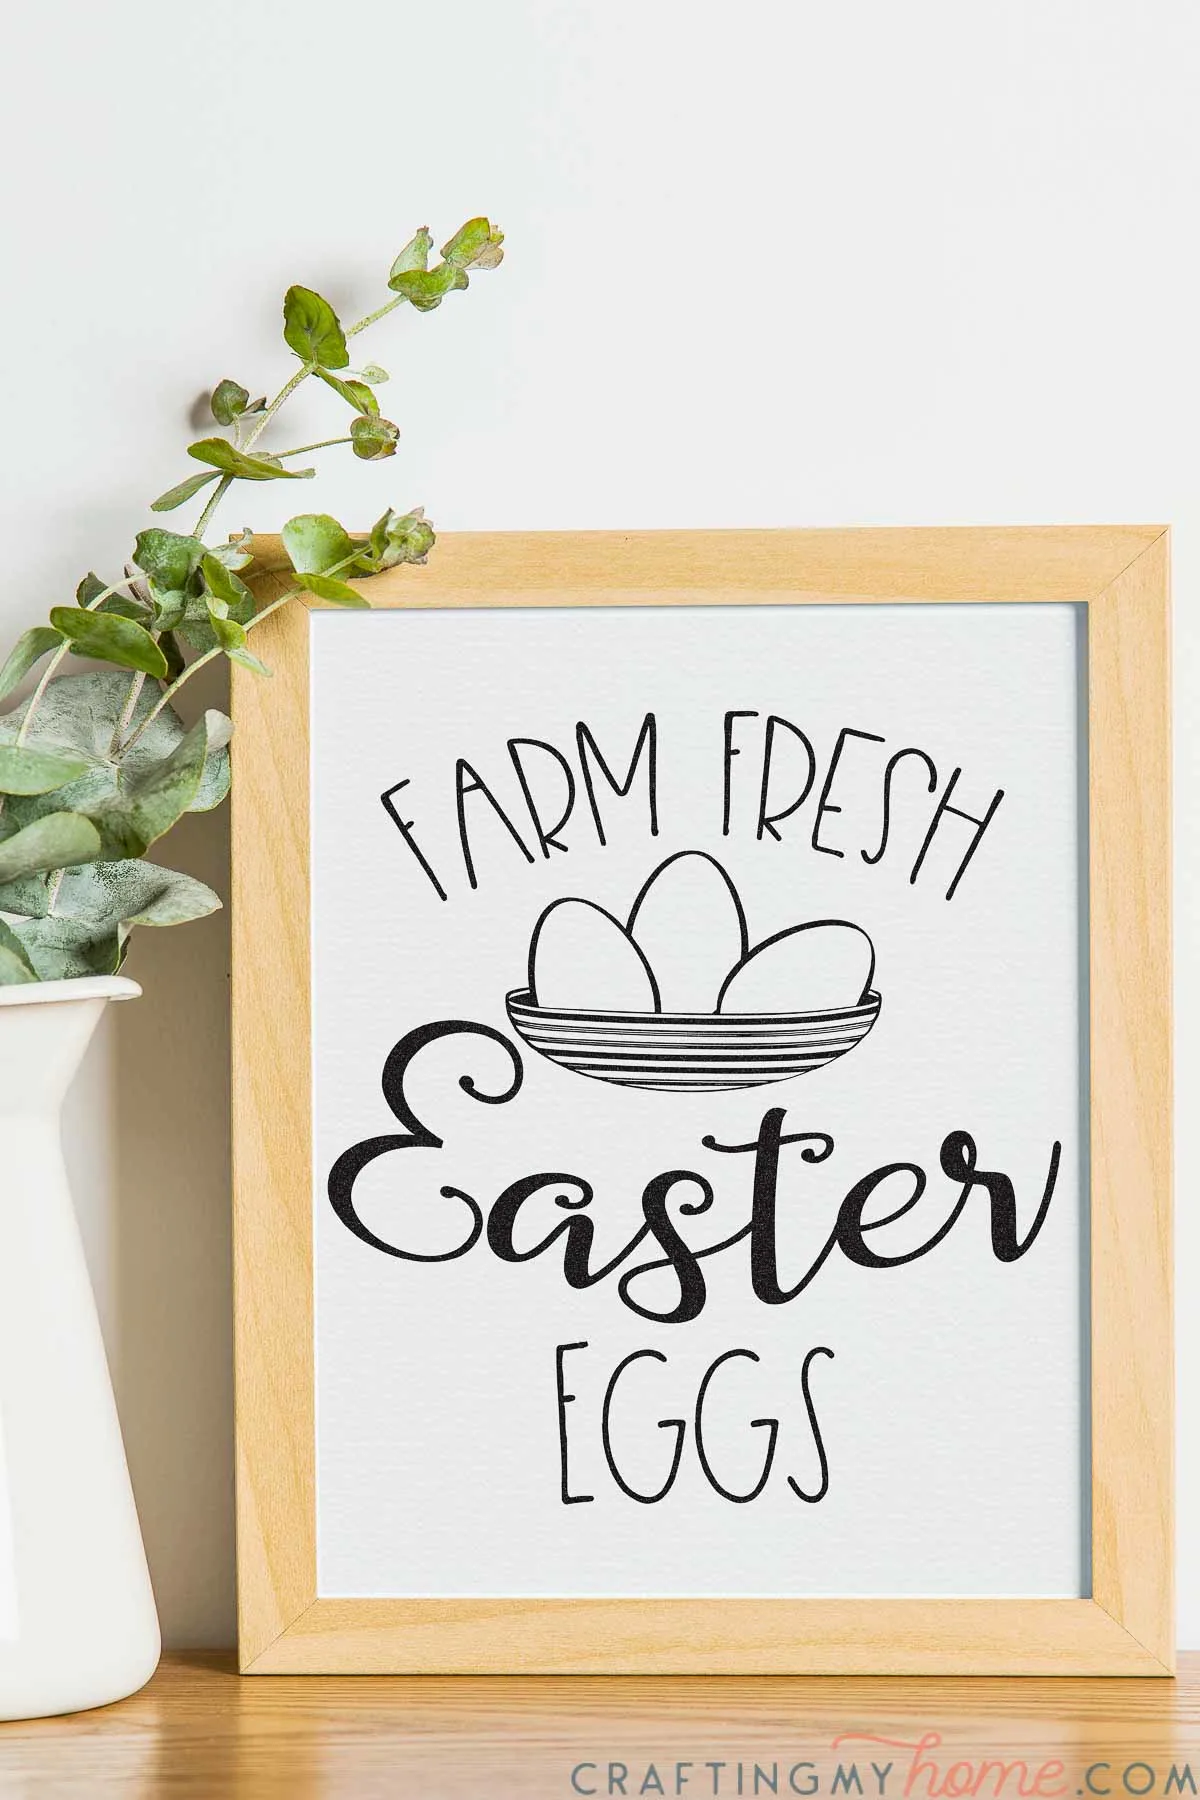 Simple easter sign that says "Farm Fresh Easter Eggs" with a sketch  of a bowl filled with 3 eggs in a picture frame. 